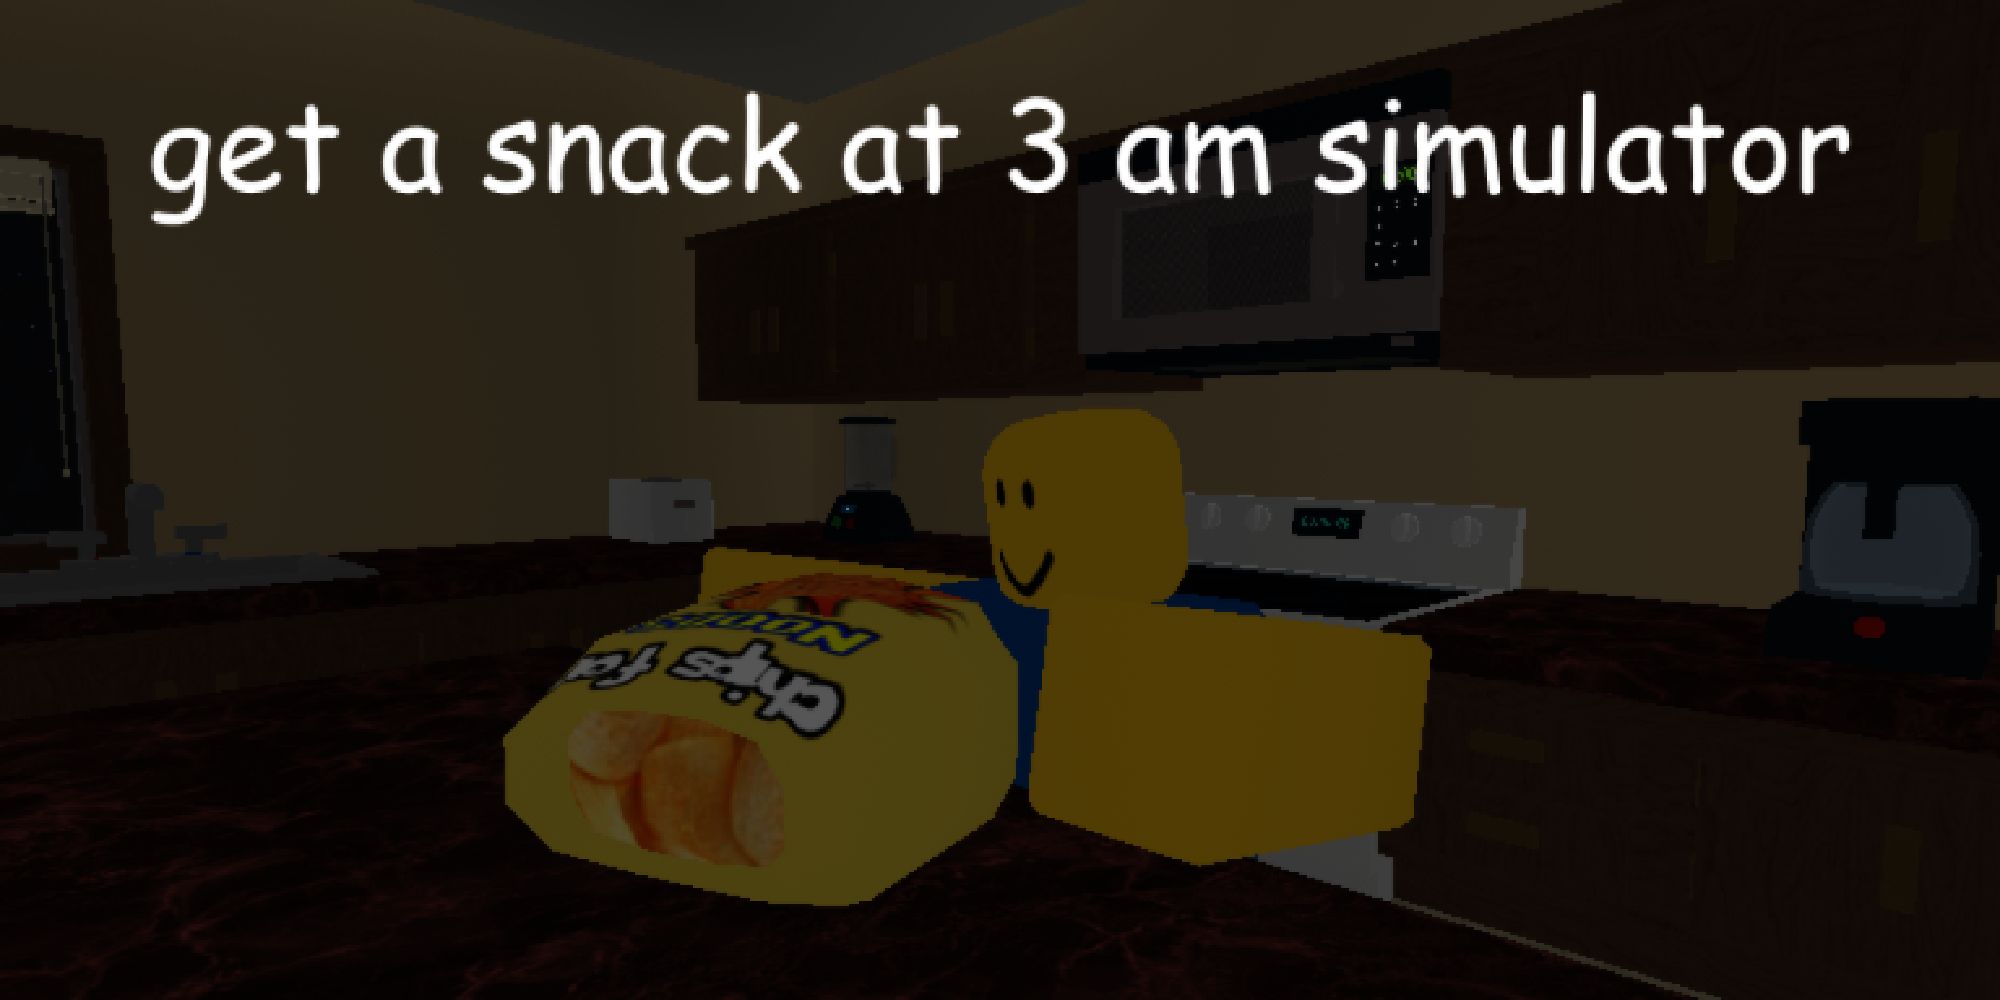 get a snack at 3am promotional image